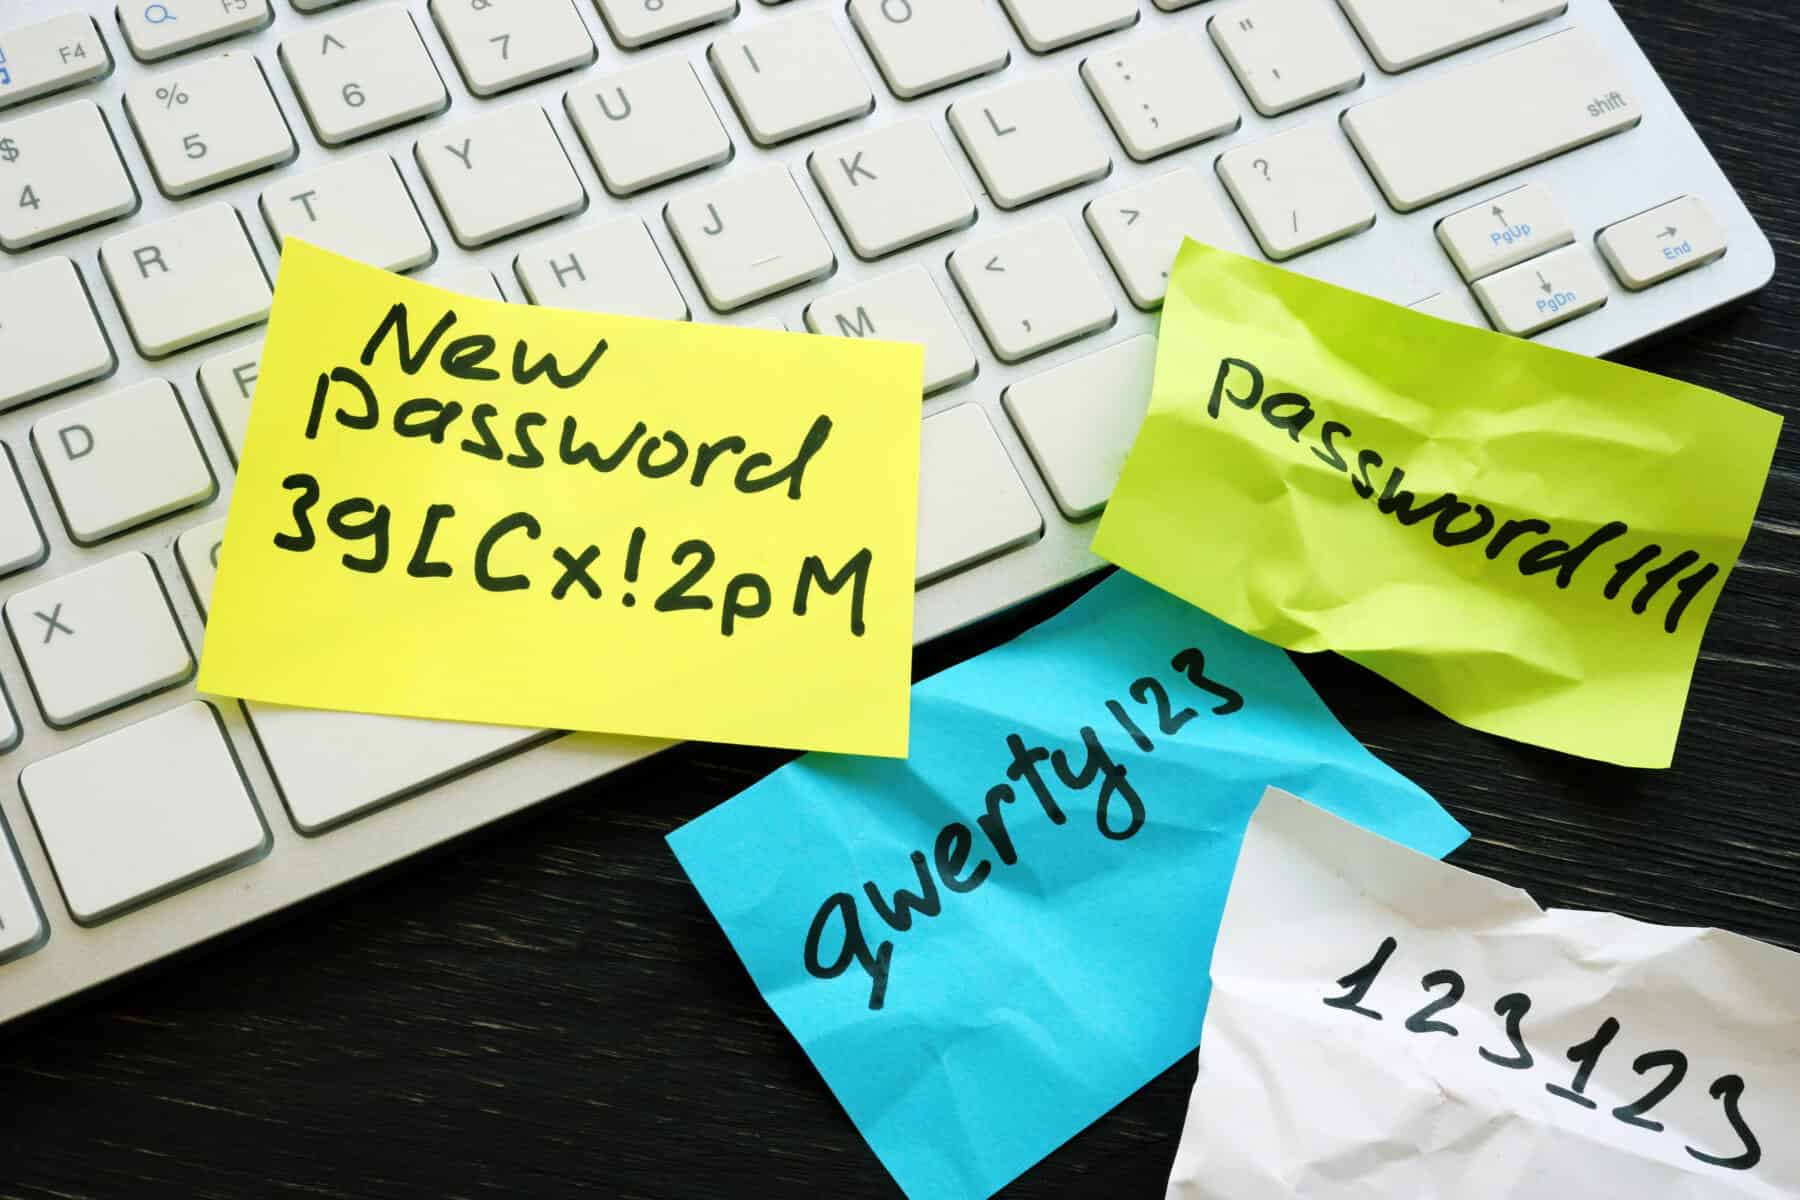 Secure passwords can be compromised if recorded on paper notes which create cybersecurity risks. 